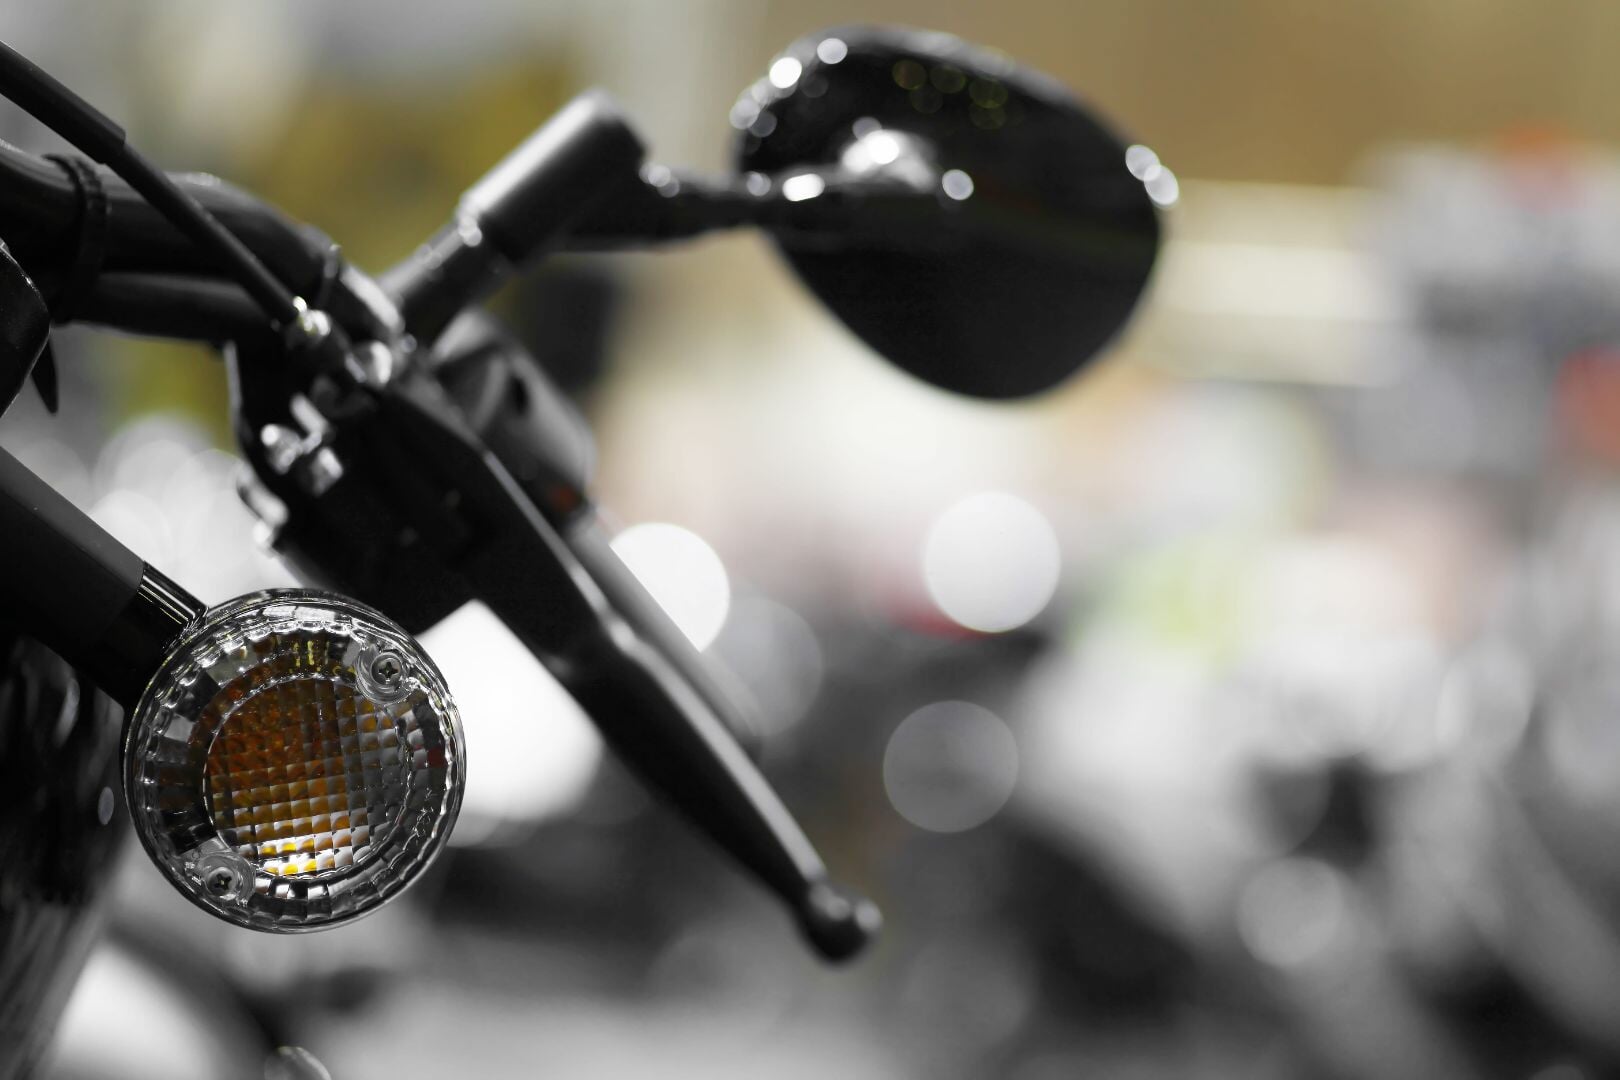 A close-up of a motorcycle's left handlebar with a focus on the circular turn signal light that has no illumination.